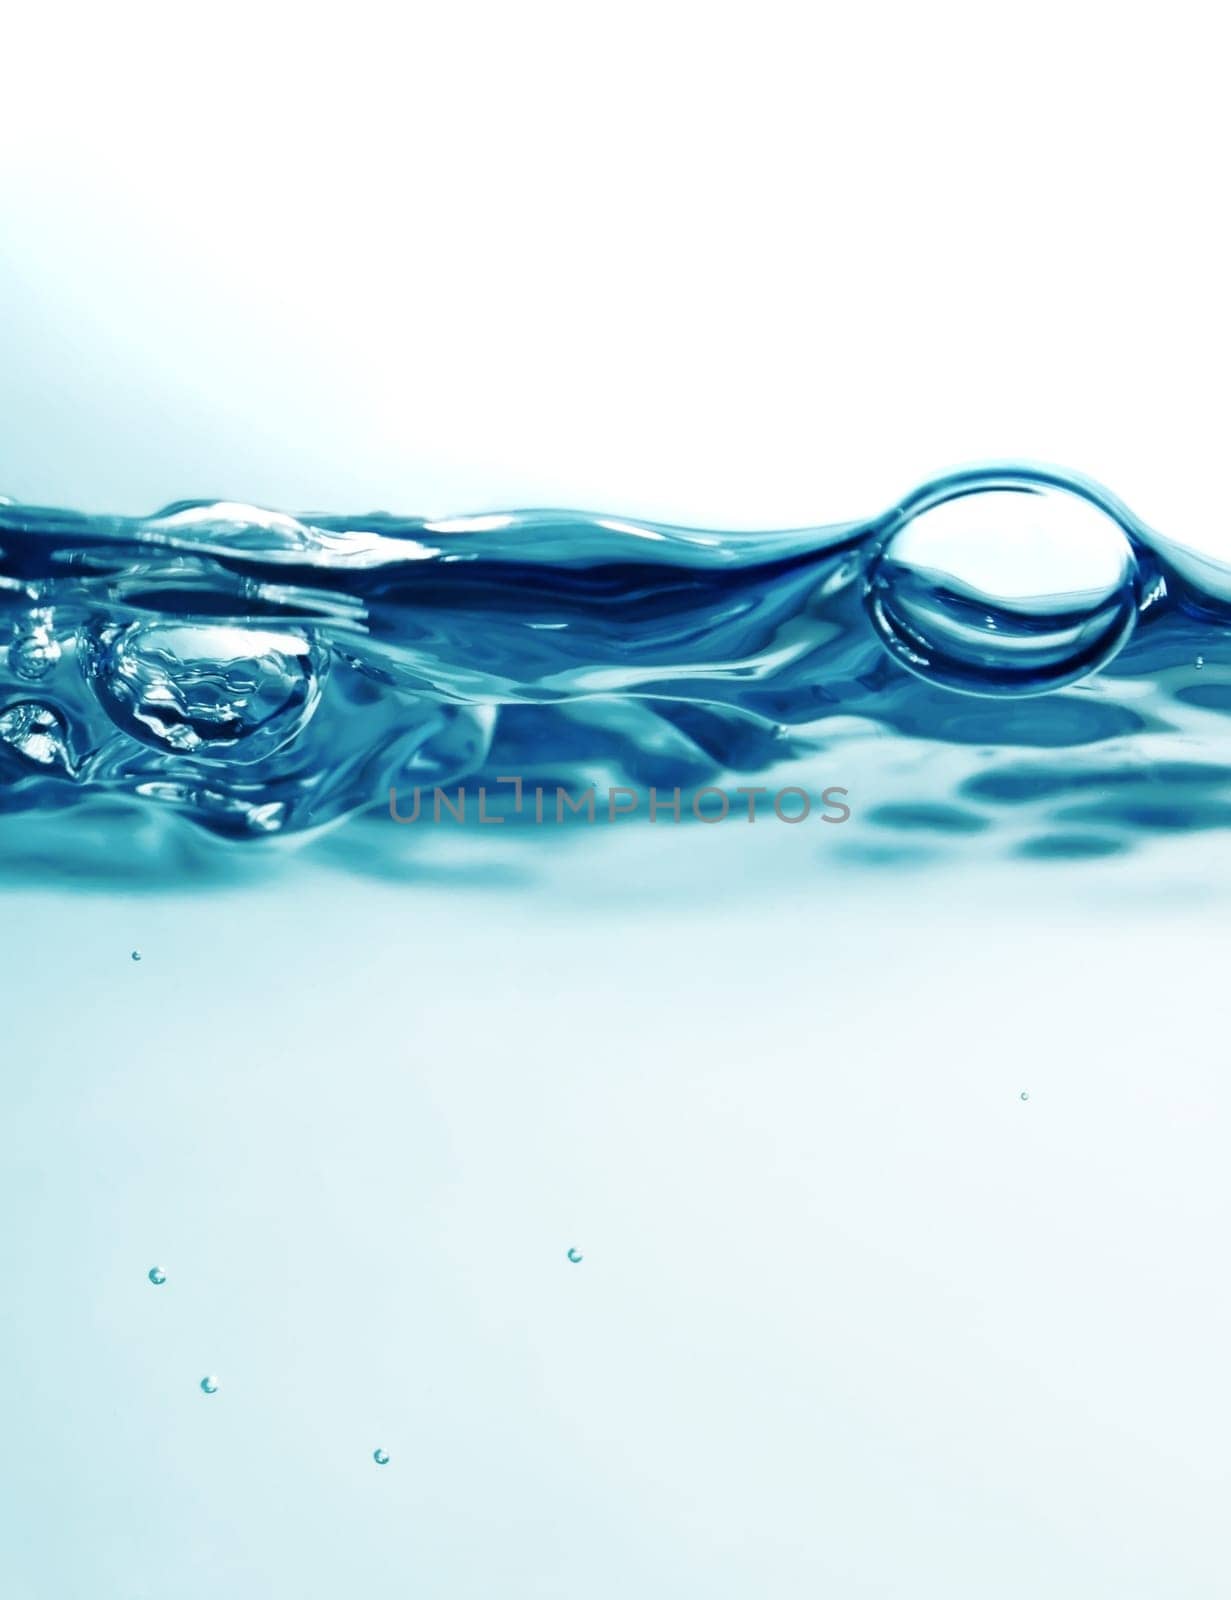 aqua art - water abstract backgrounds styled concept by Anneleven